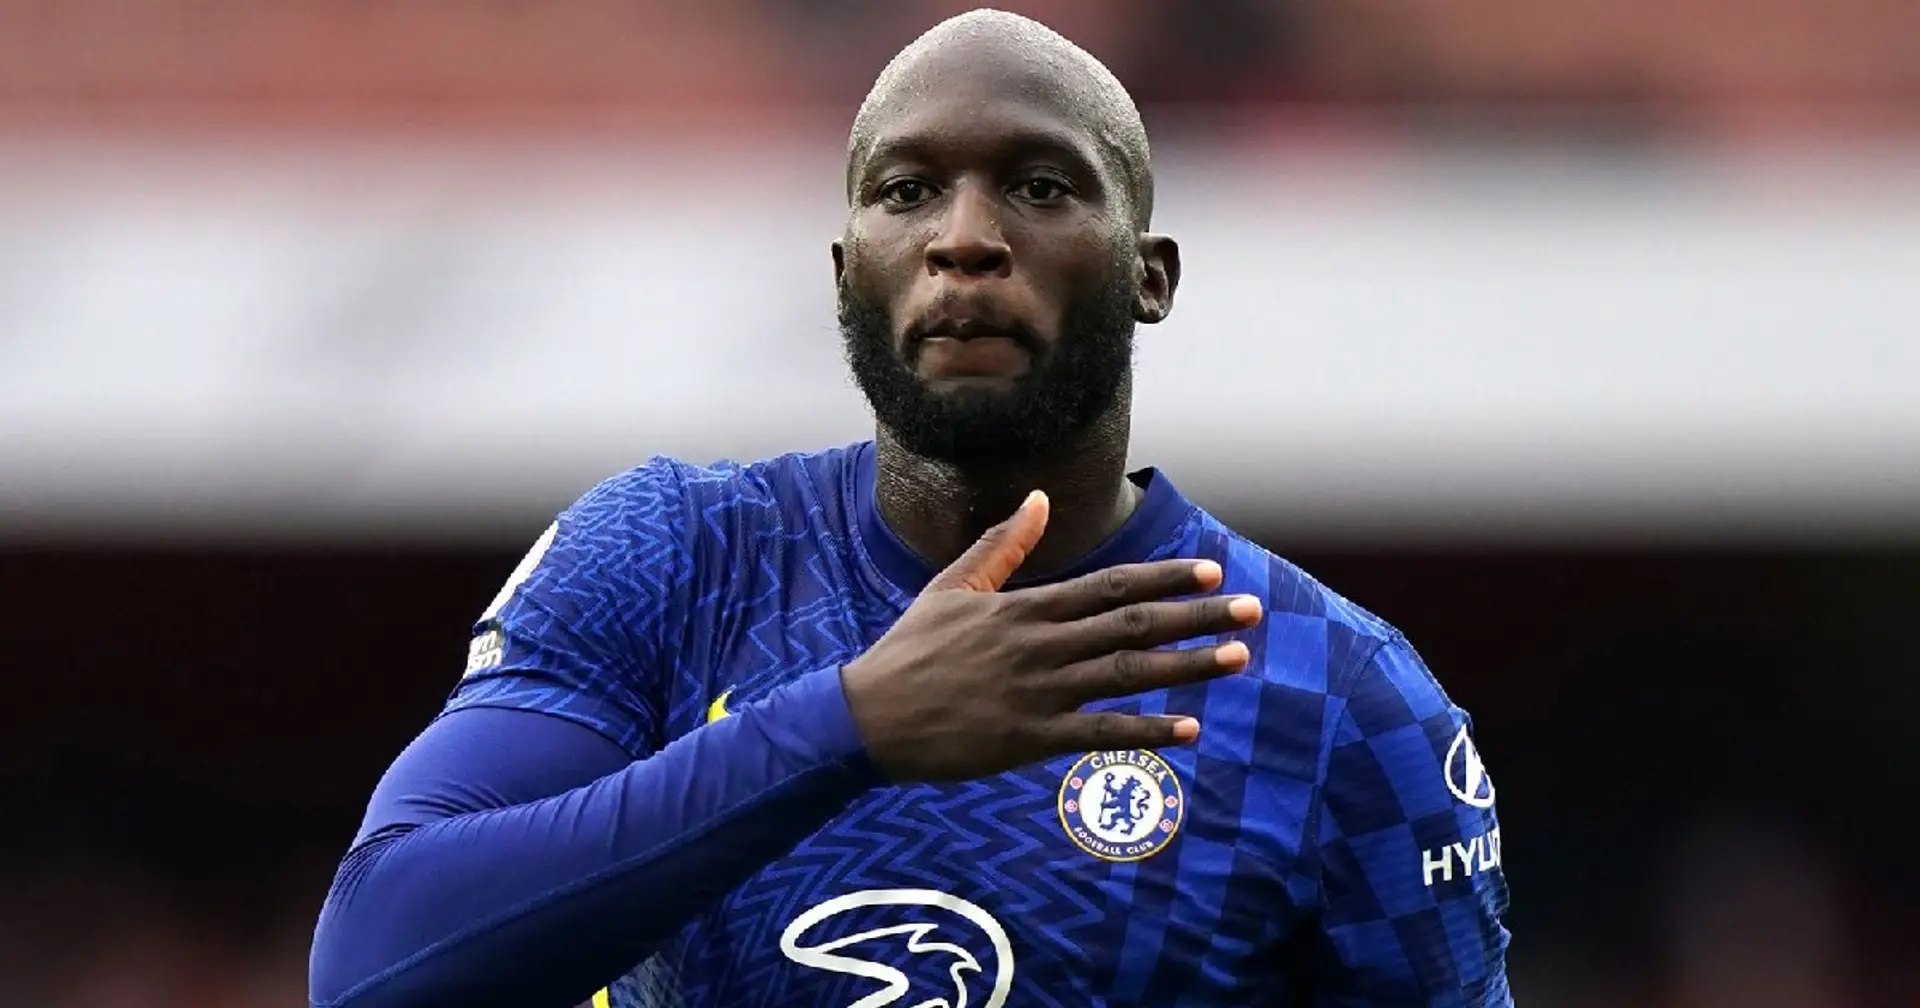 Chelsea will allow Lukaku to go out on loan – interested clubs revealed (reliability: 5 stars)